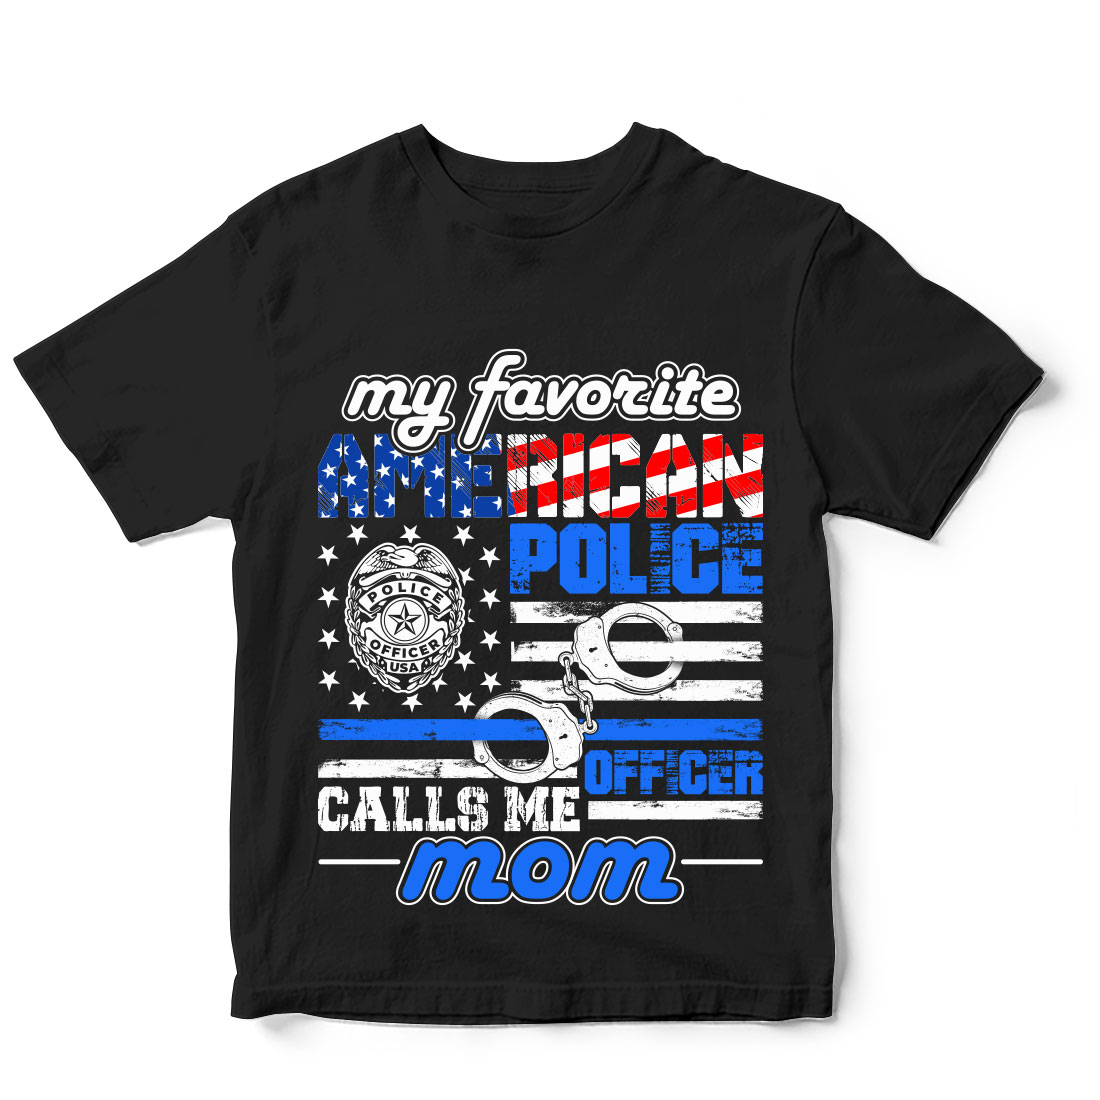 Black t - shirt with a police officer design.